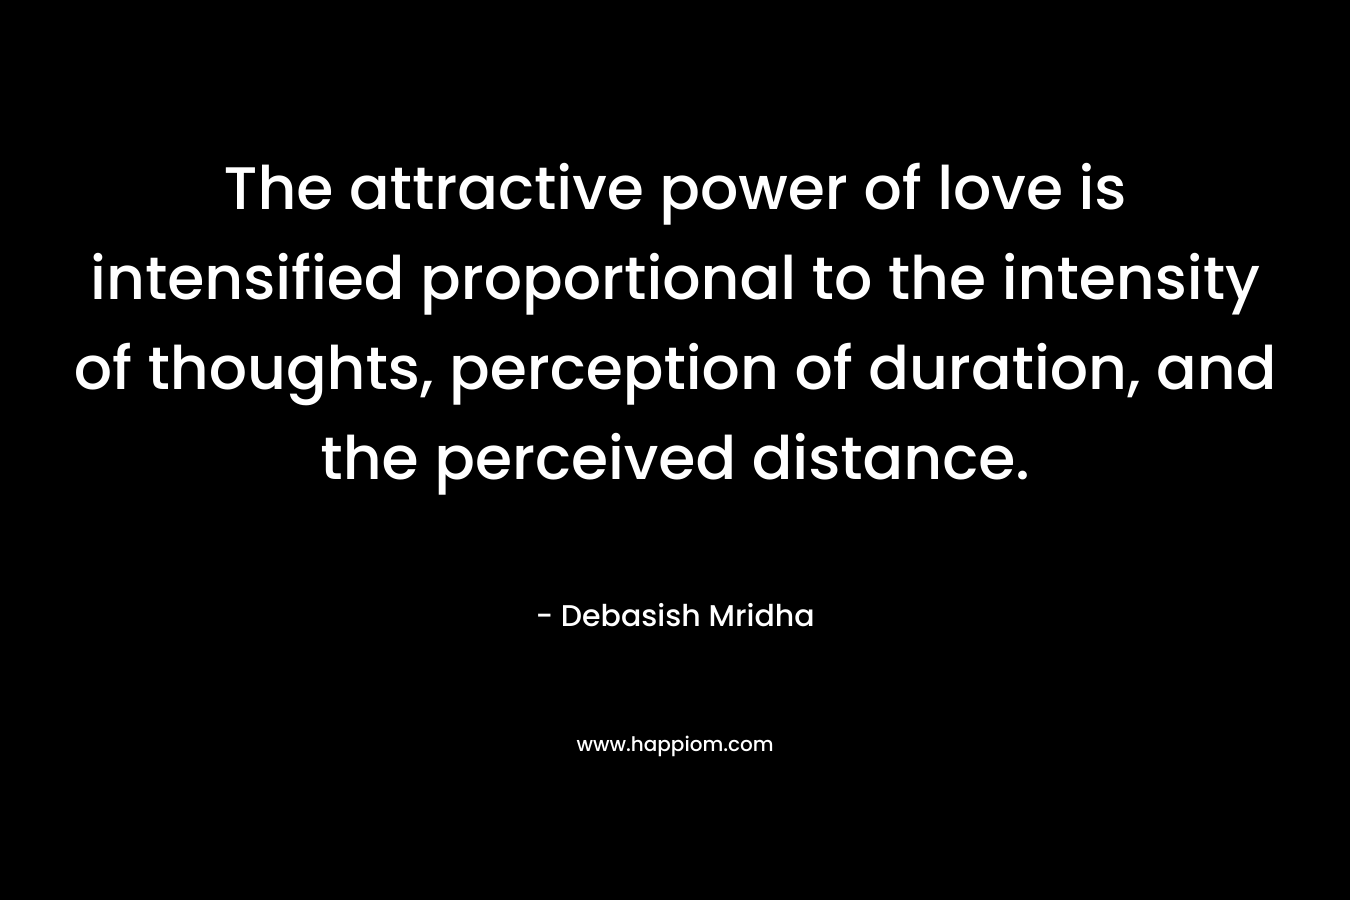 The attractive power of love is intensified proportional to the intensity of thoughts, perception of duration, and the perceived distance. – Debasish Mridha